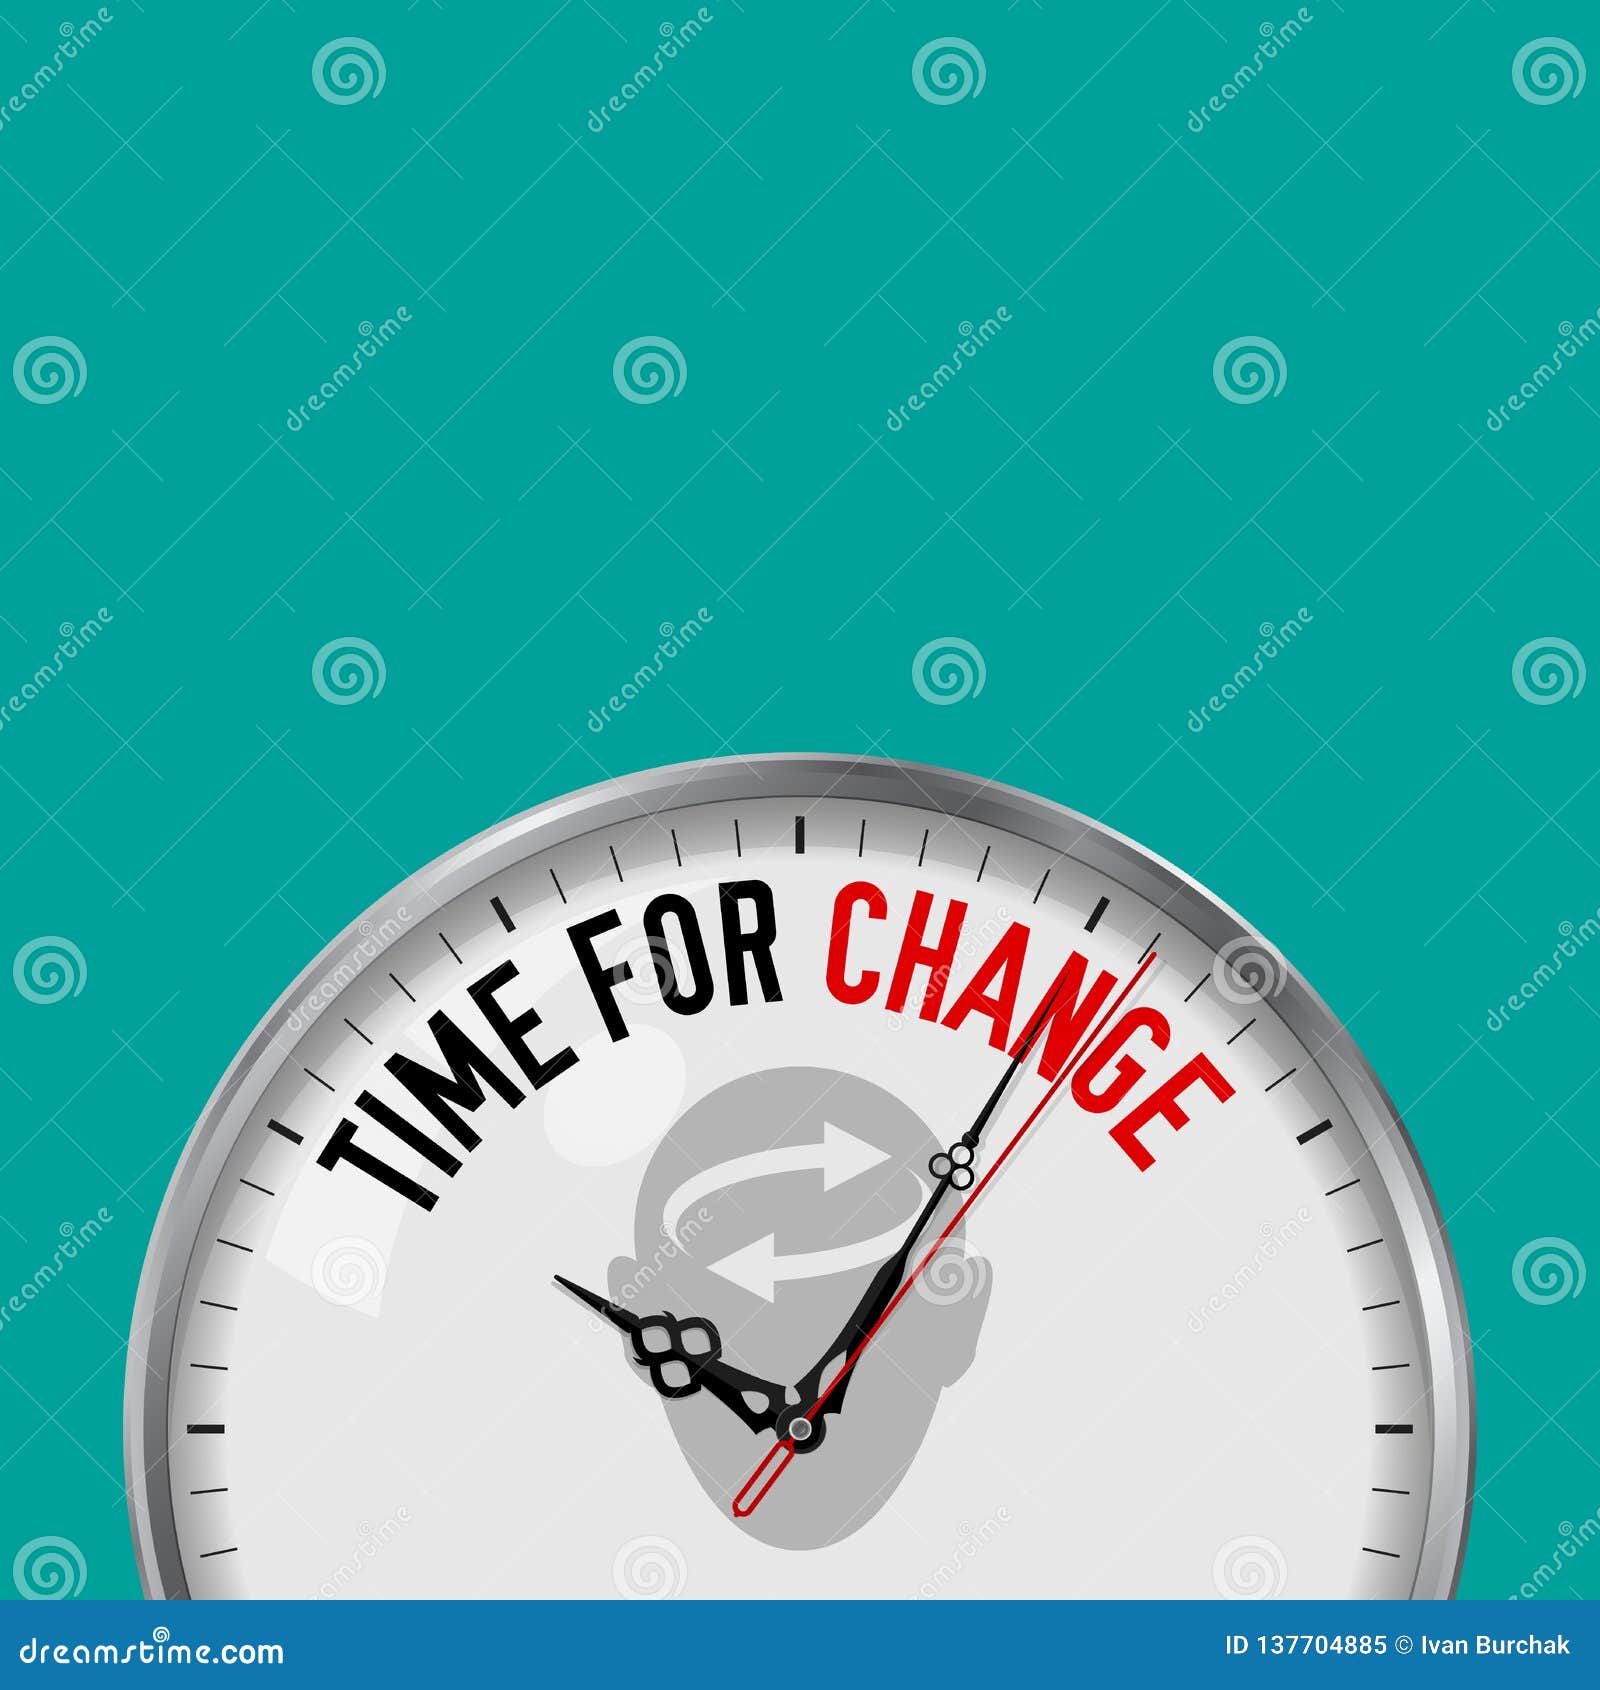 your time for change